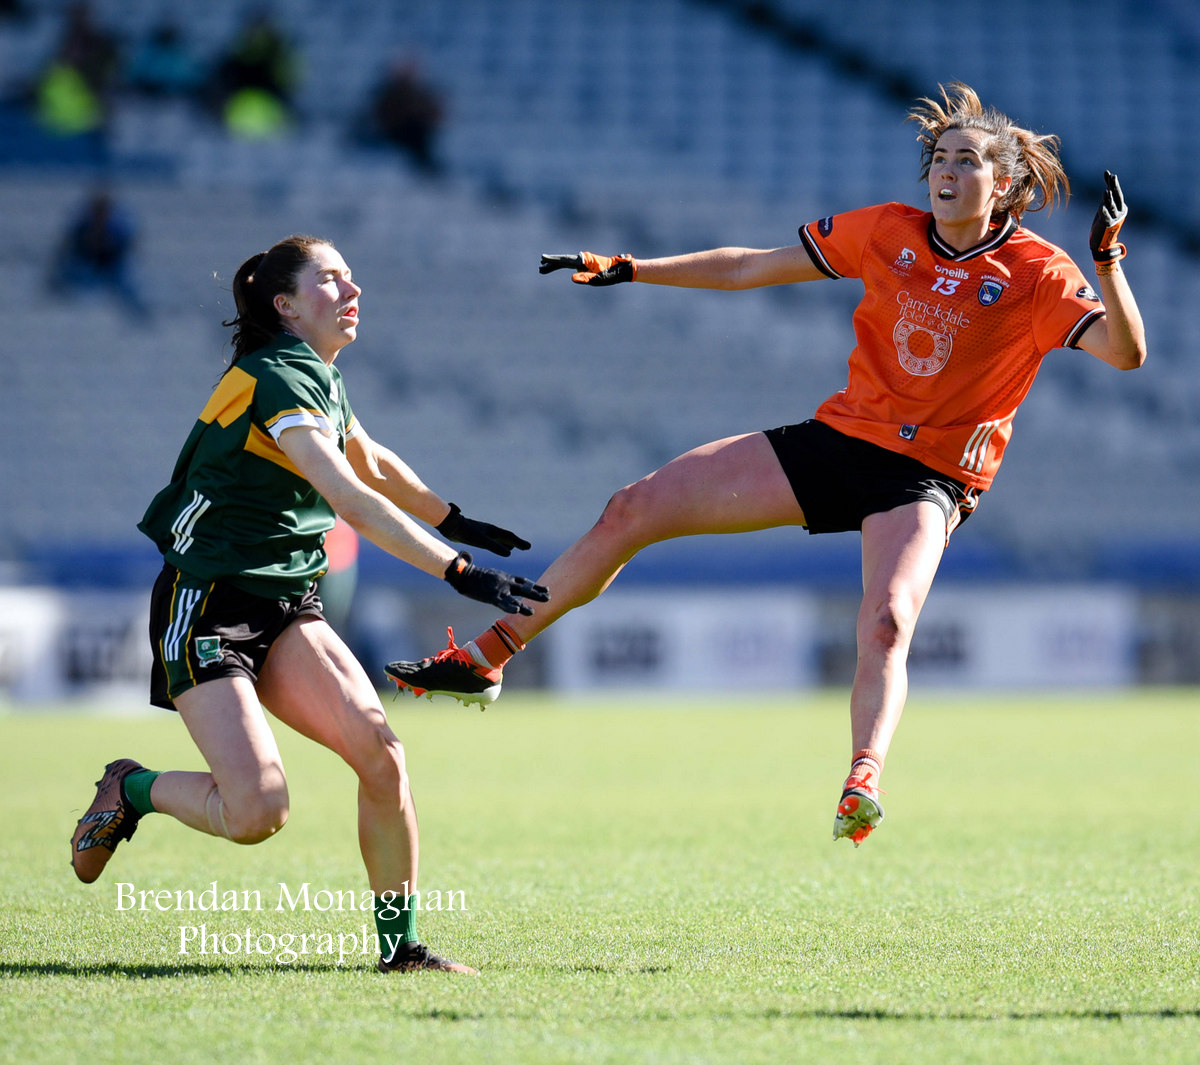 A goal of the highest quality from @AimeeMackin @ArmaghLGFA and the best thing is she'll still be the same Aimee the next time you meet her